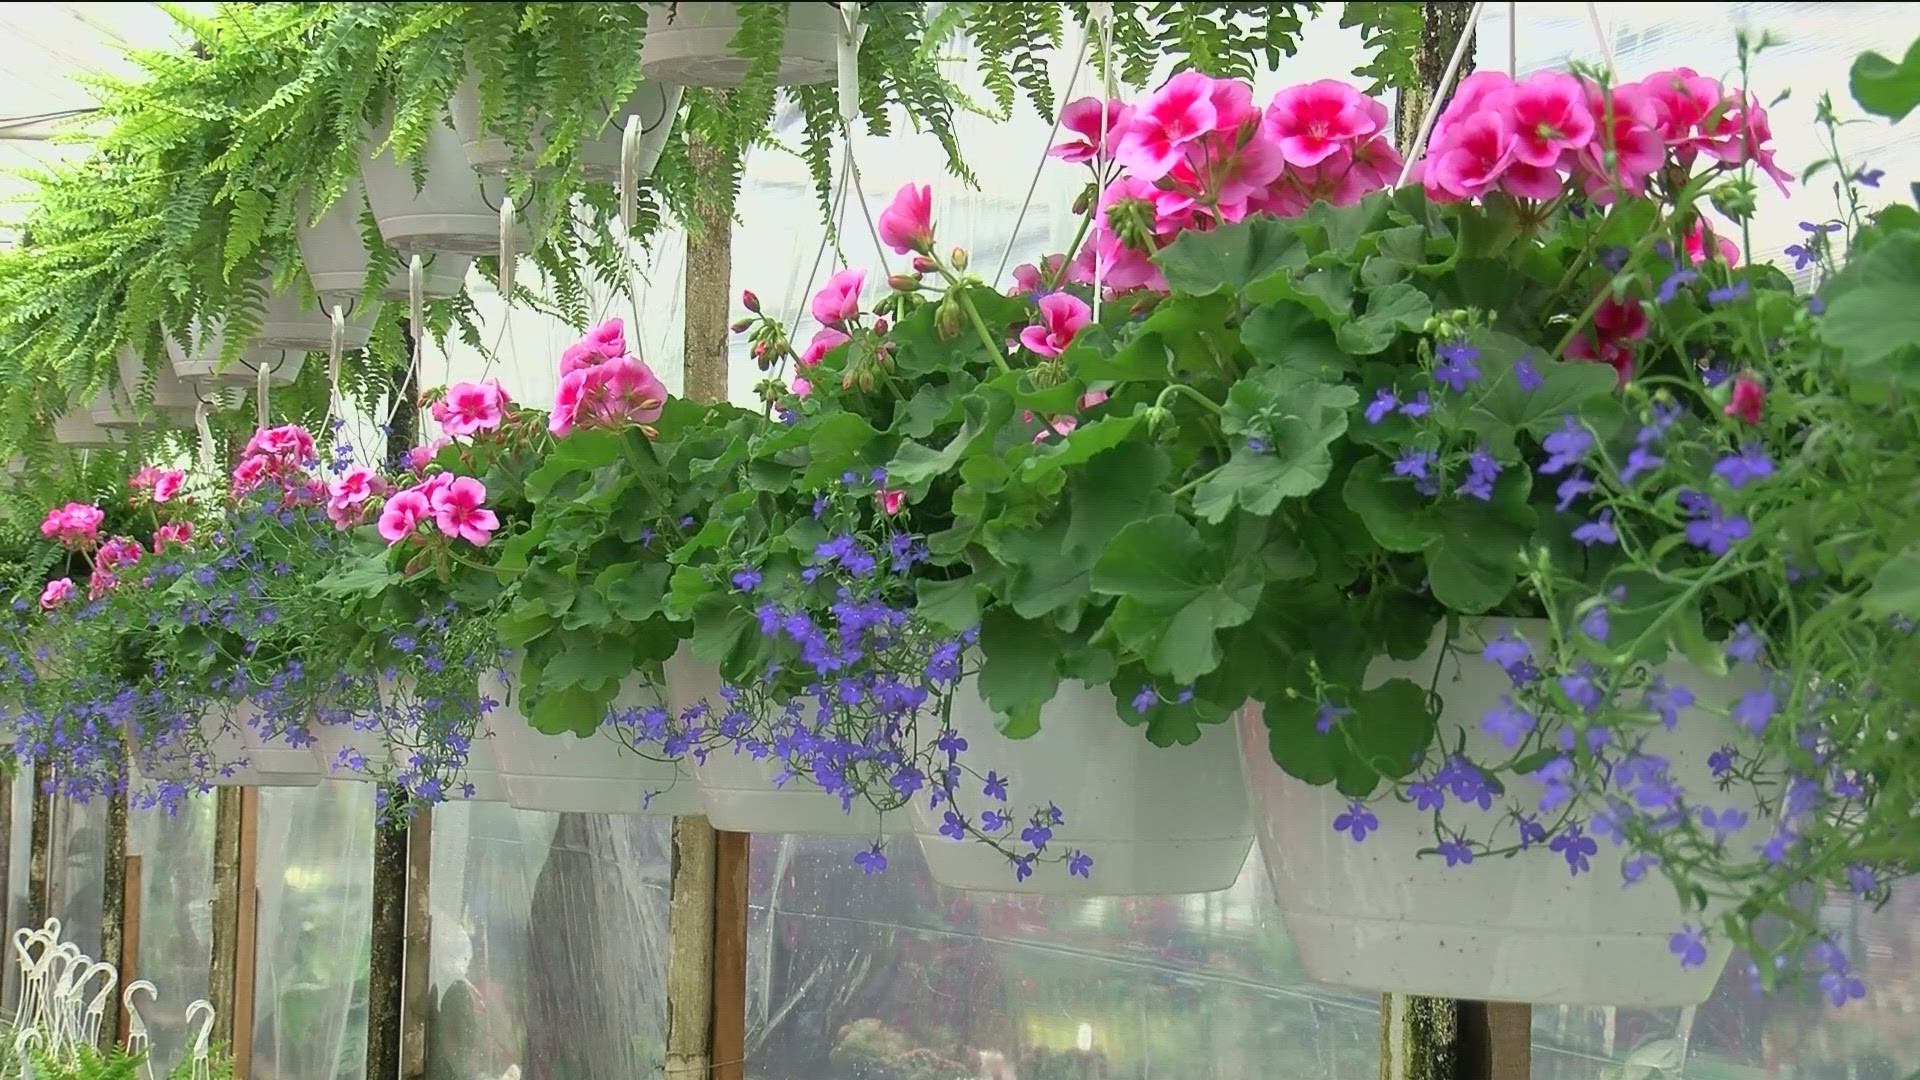 Mother's Day truly marks the sign of the beginning of gardening season and a burst of colors, but a lot of preparation goes into having a successful spring bloom.